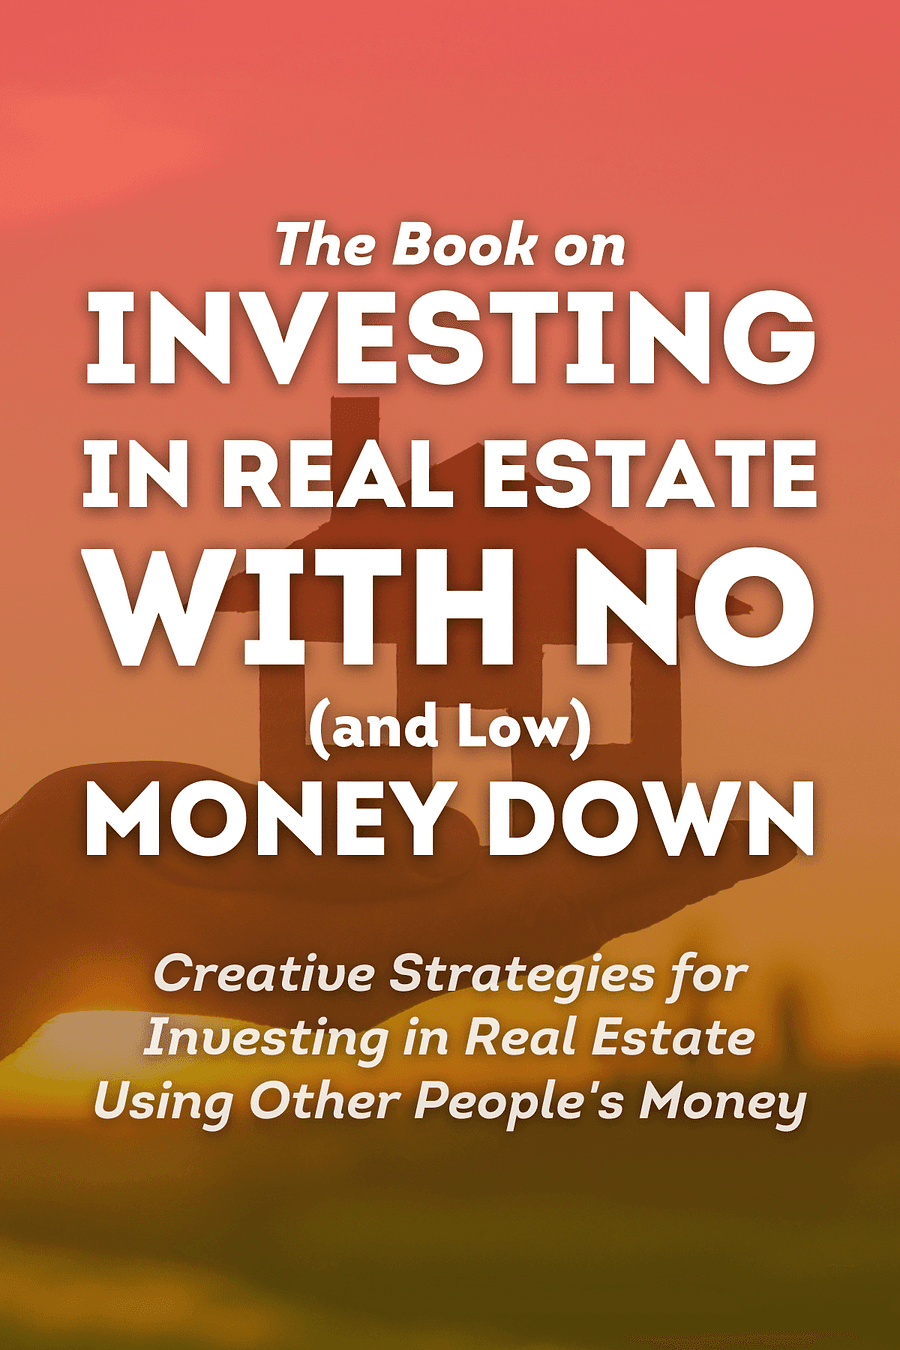 The Book on Investing In Real Estate with No (and Low) Money Down by Brandon Turner - Book Summary